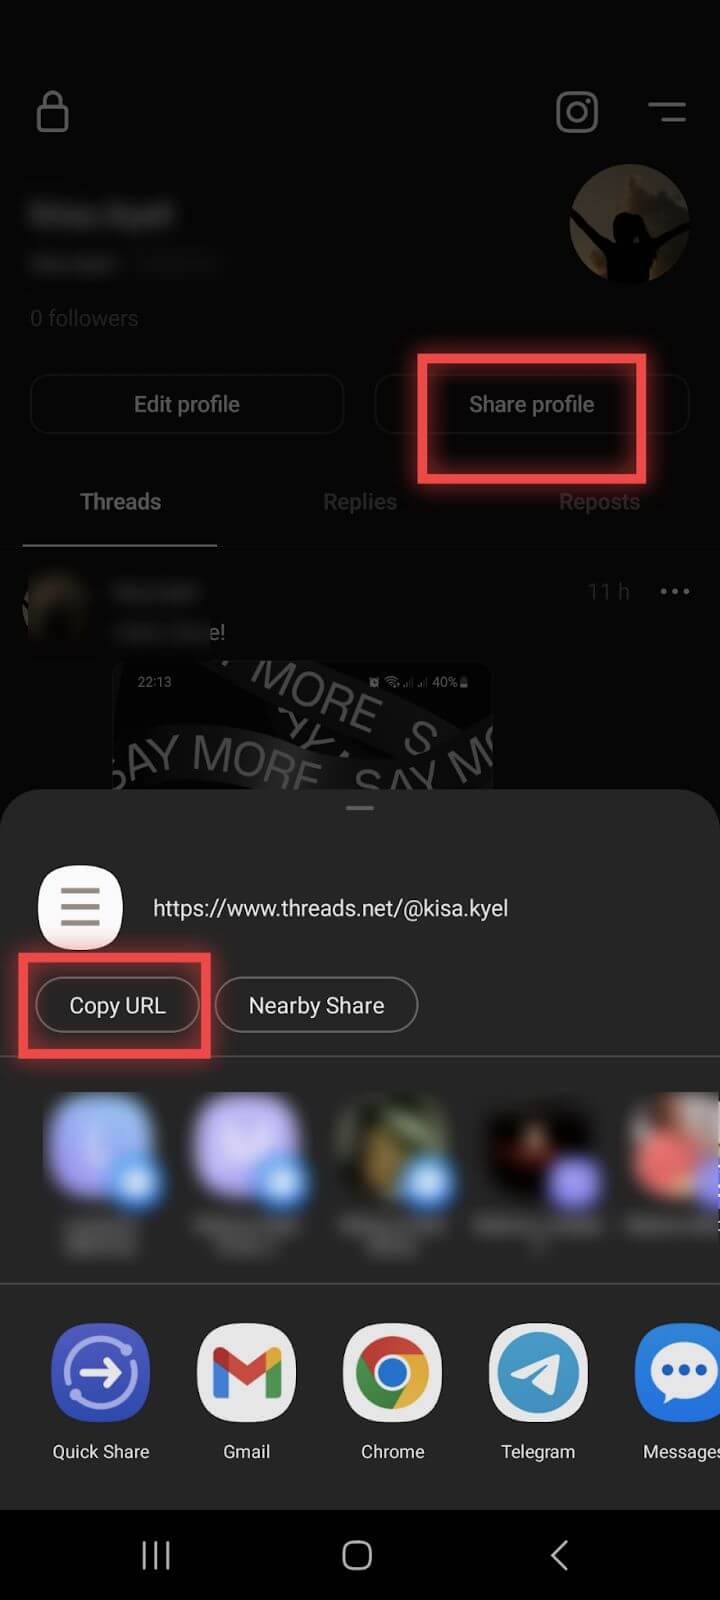  Copy URL option from share profile option